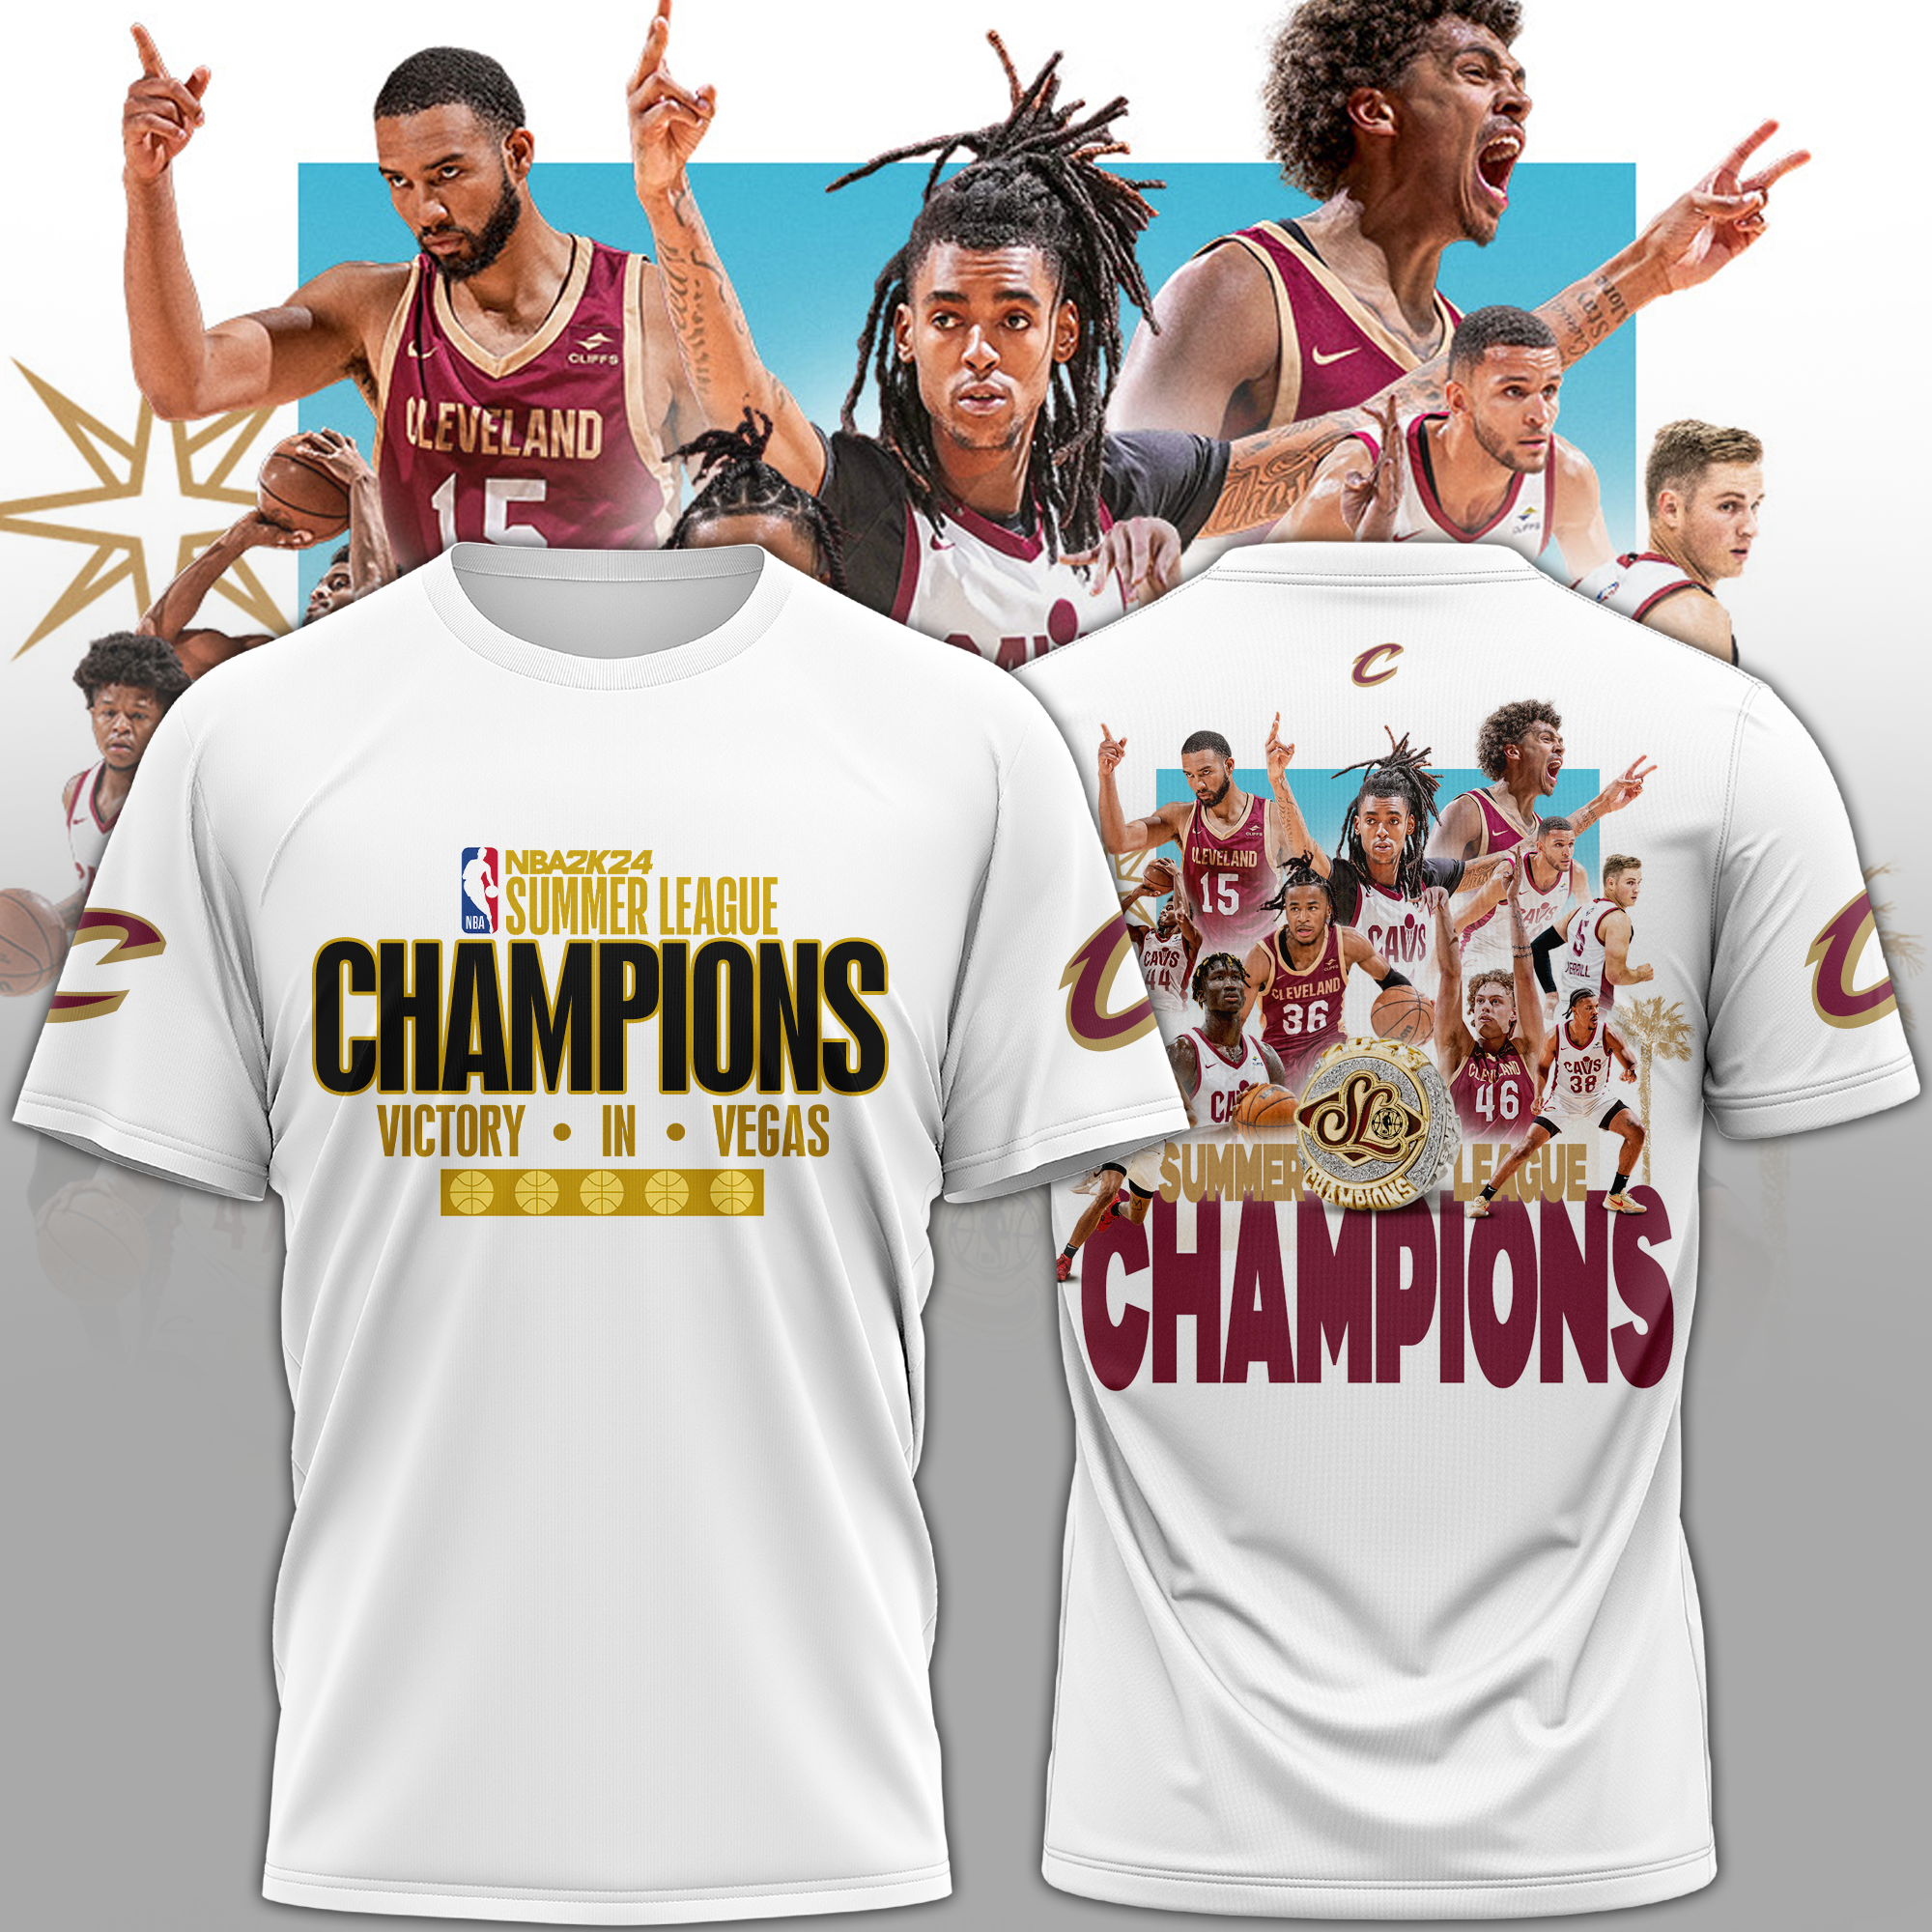 Shop Official Cleveland Cavaliers Championship Apparel and Merchandise